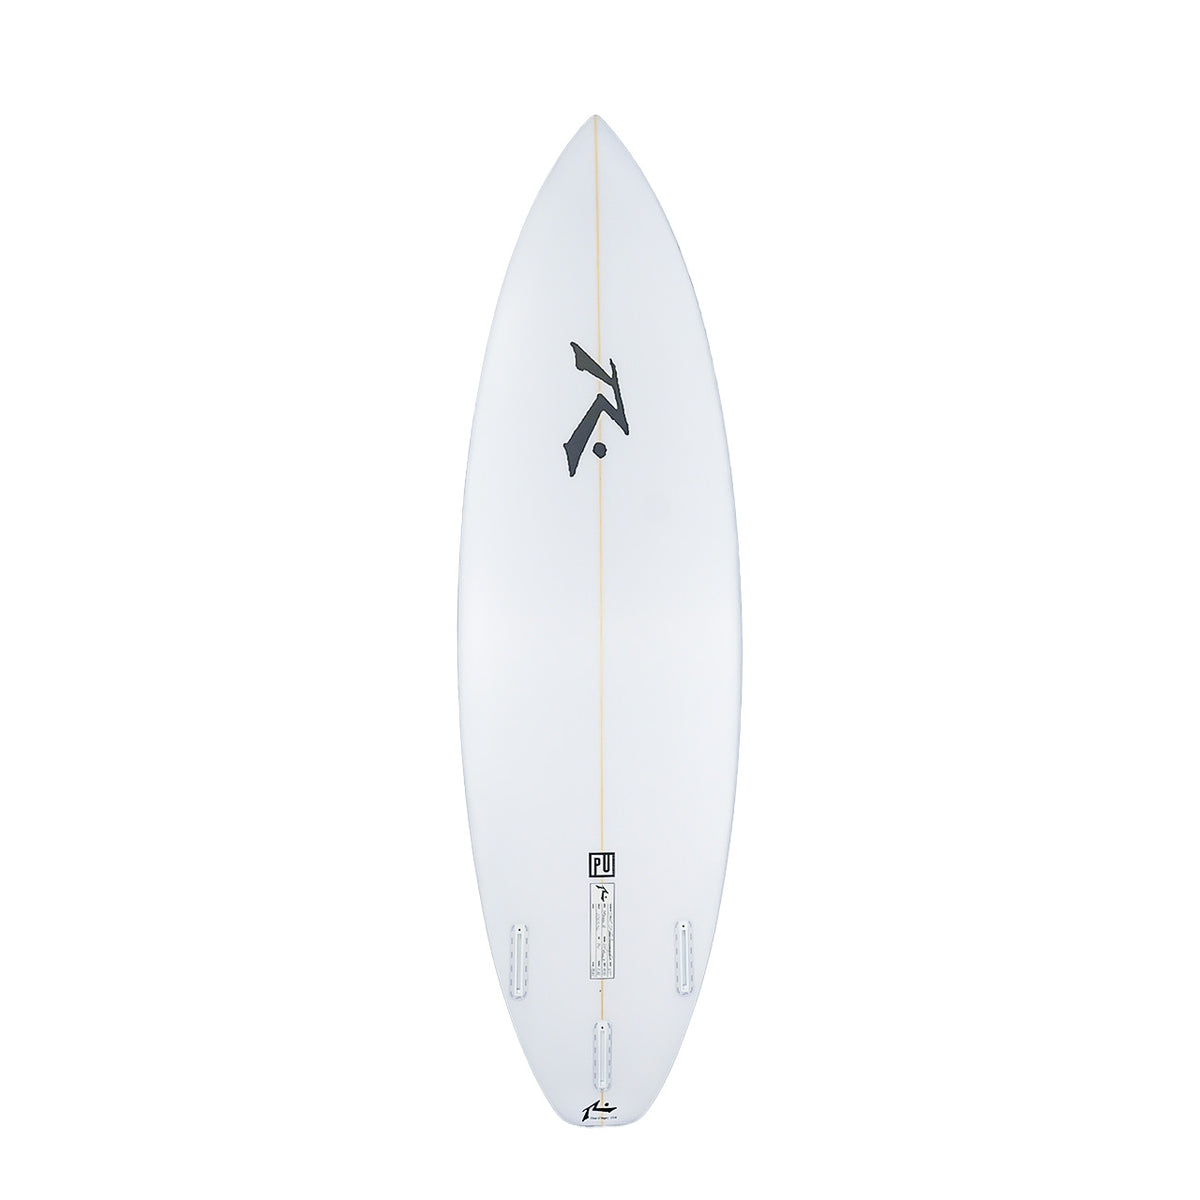 Model 8 High Performance Shortboard - Bottom View - Rusty Surfboards